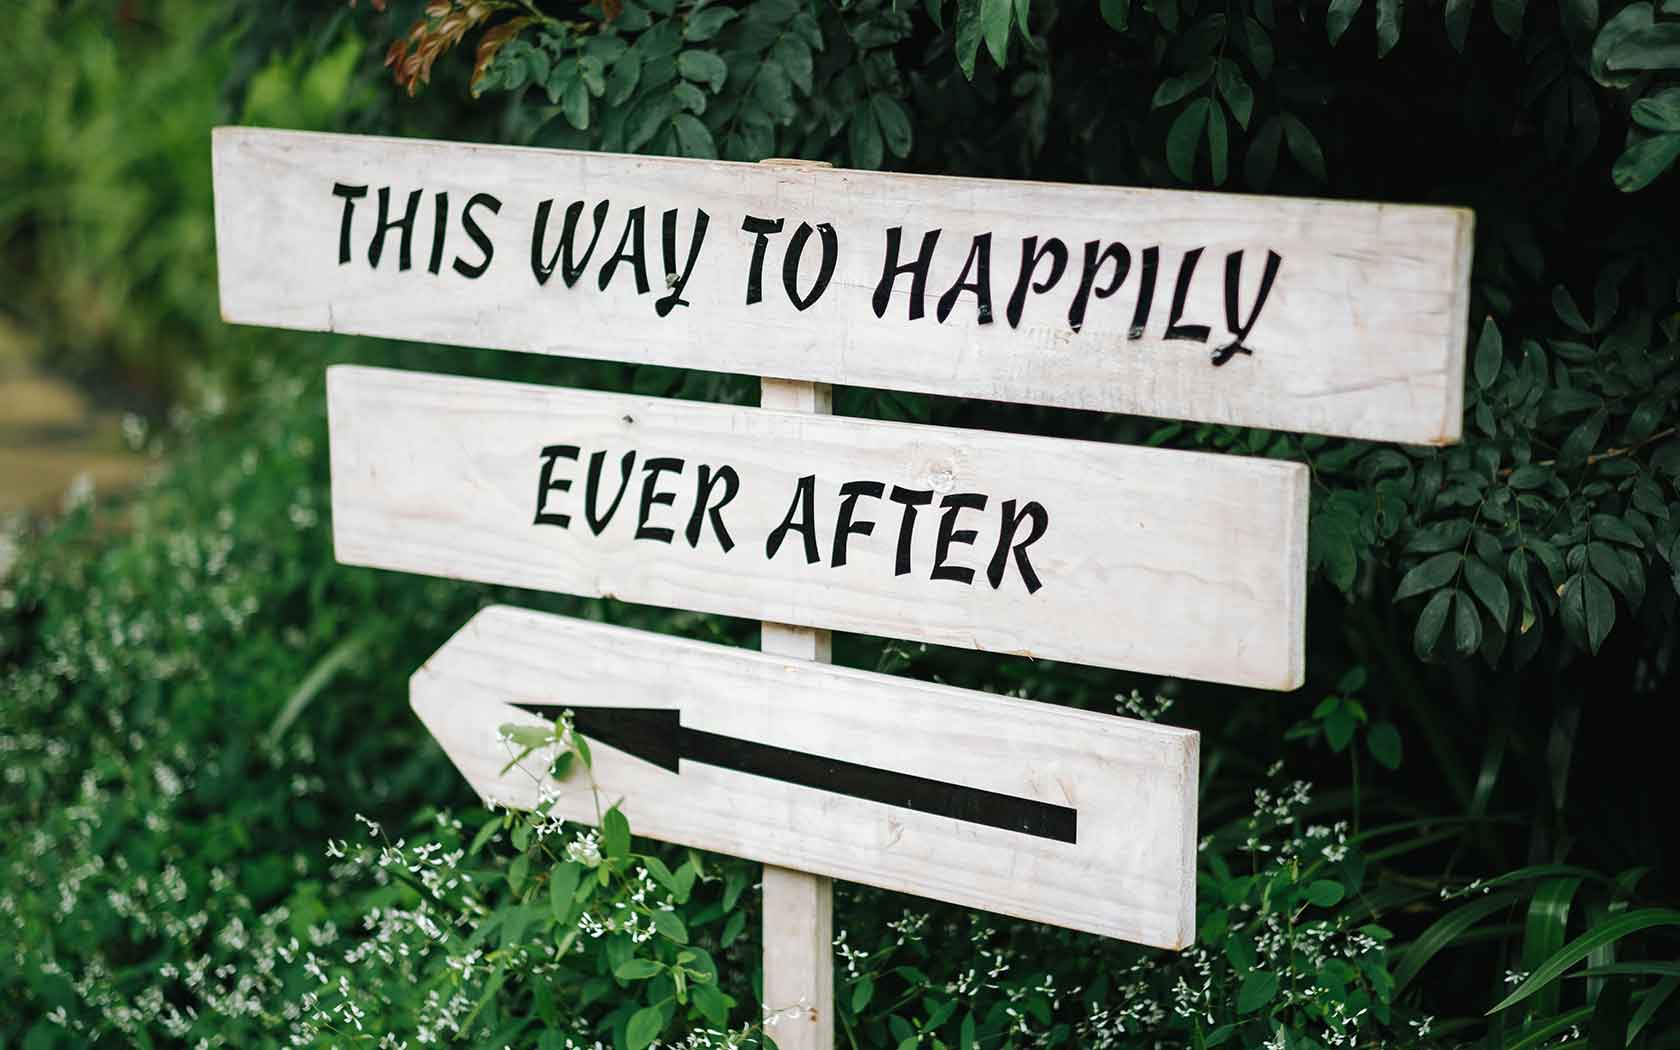 happily-ever-after